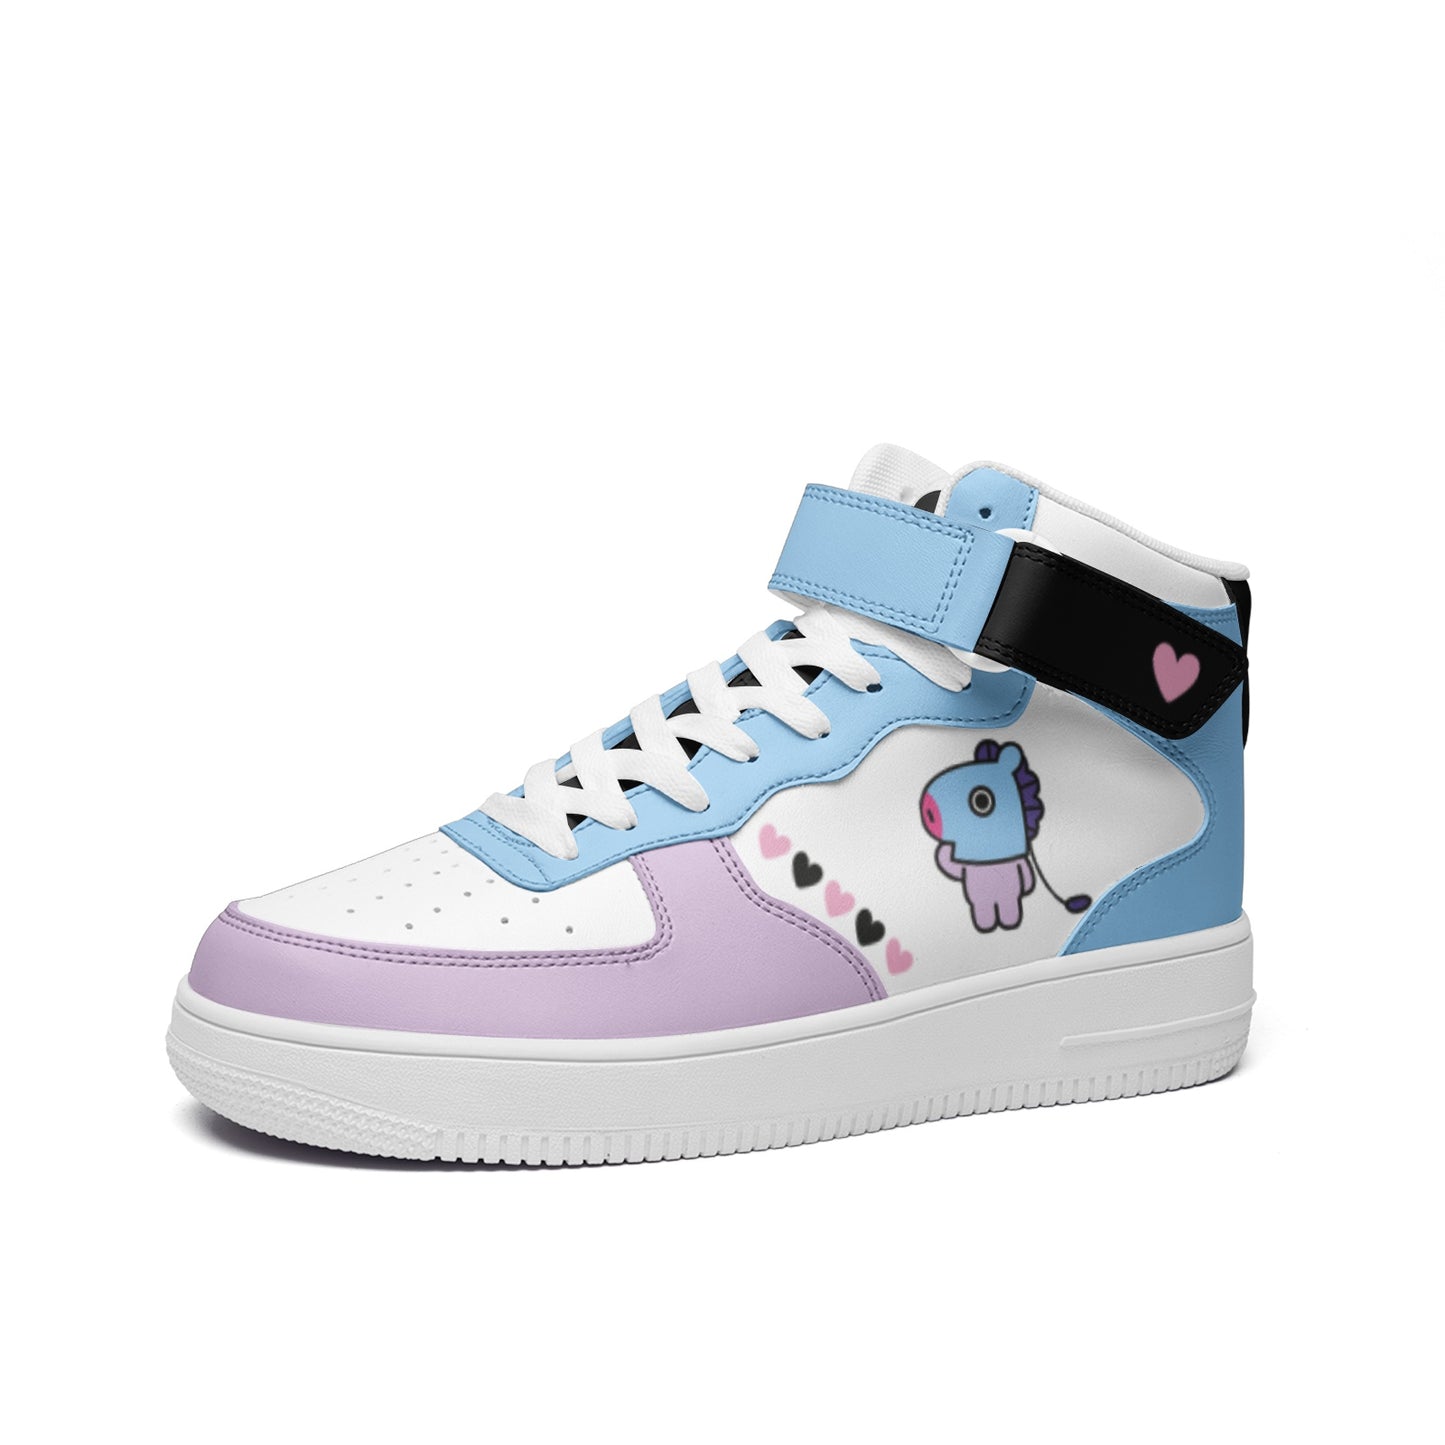 BT21 Mang Unisex high Top Leather Sneakers